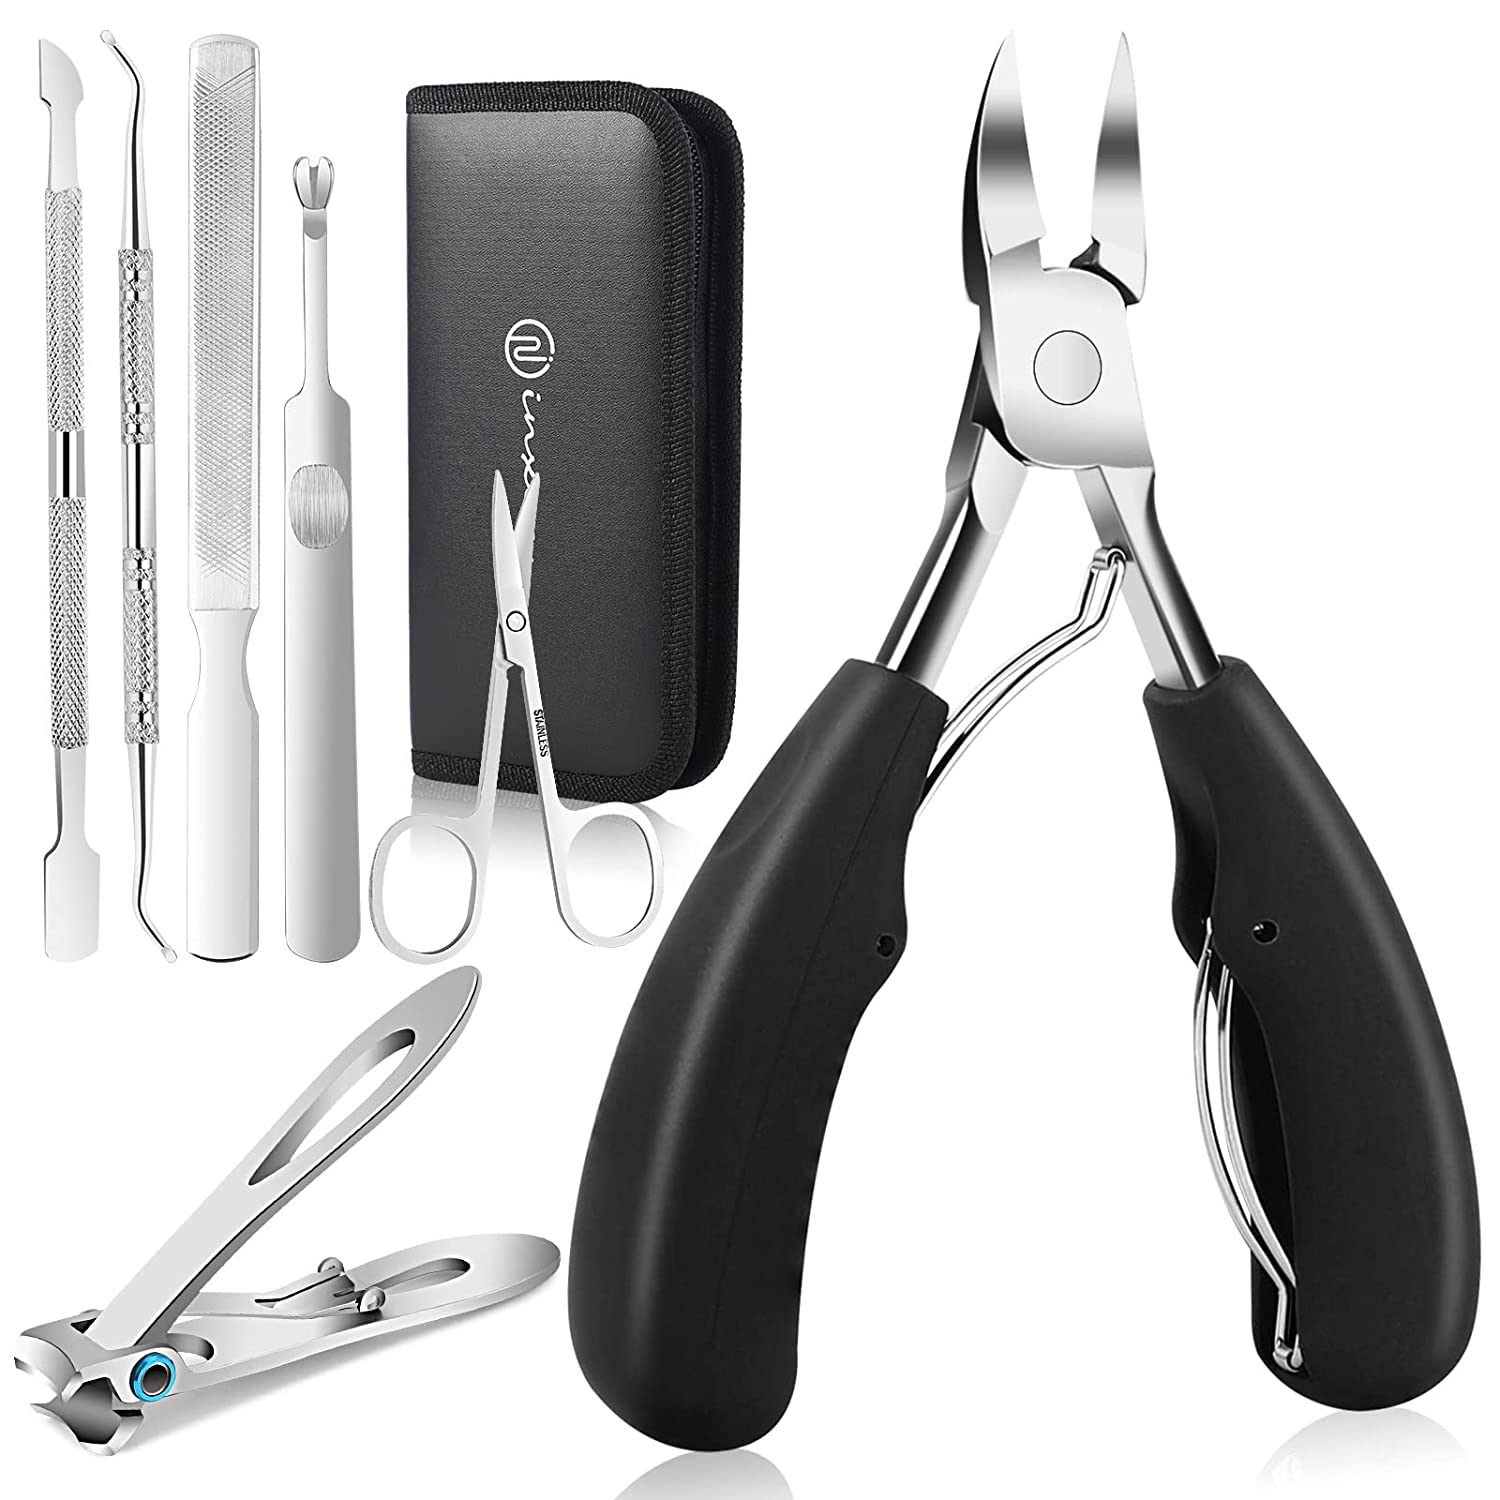 INXEN Pack of 7 Professional Toenail Nail Clippers, Super Sharp Nail Clippers for Thickness and Ingrown Hard Toenails, Stainless Steel Pedicure Clippers, Nail File, Soft Grip Nail Scissors Set, Black, ‎black